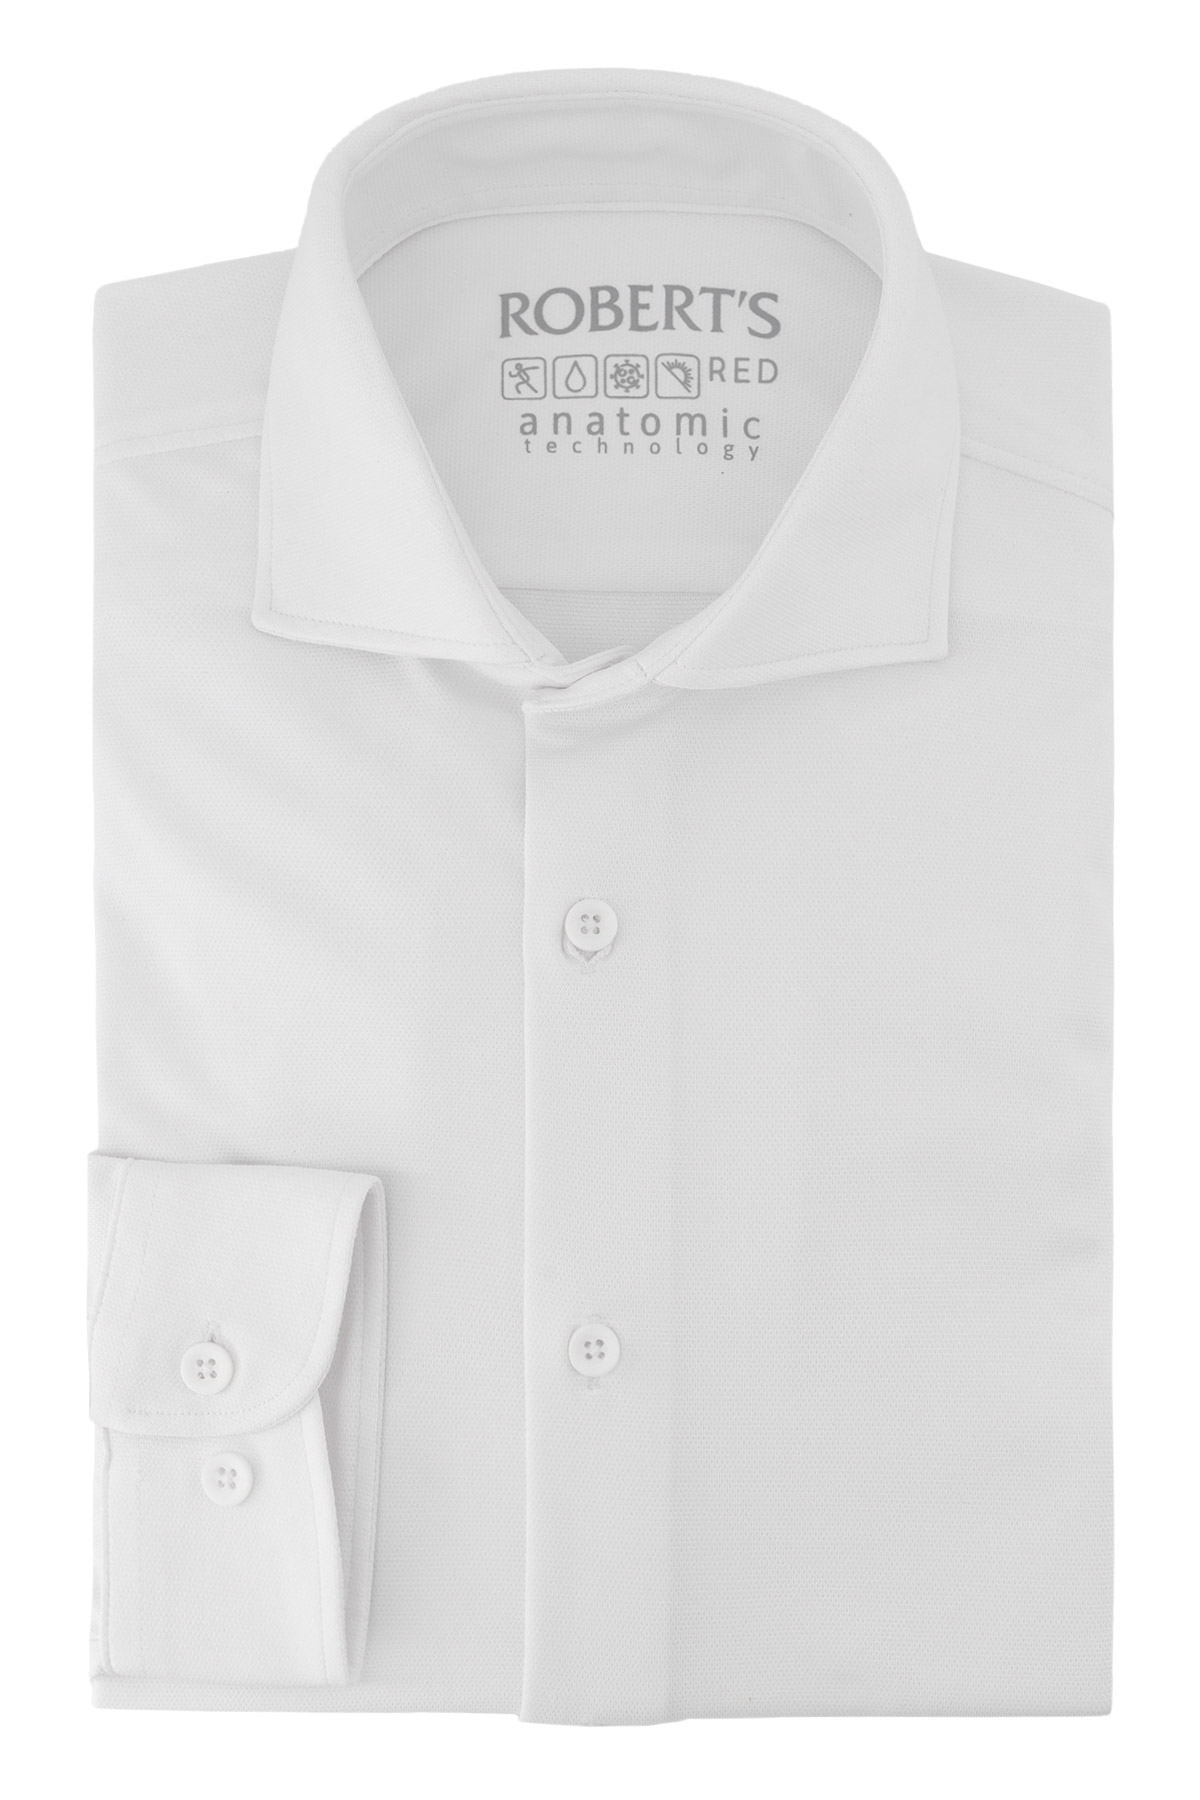 Camisa Roberts Red Anatomic Technology Slim fit Color blanco